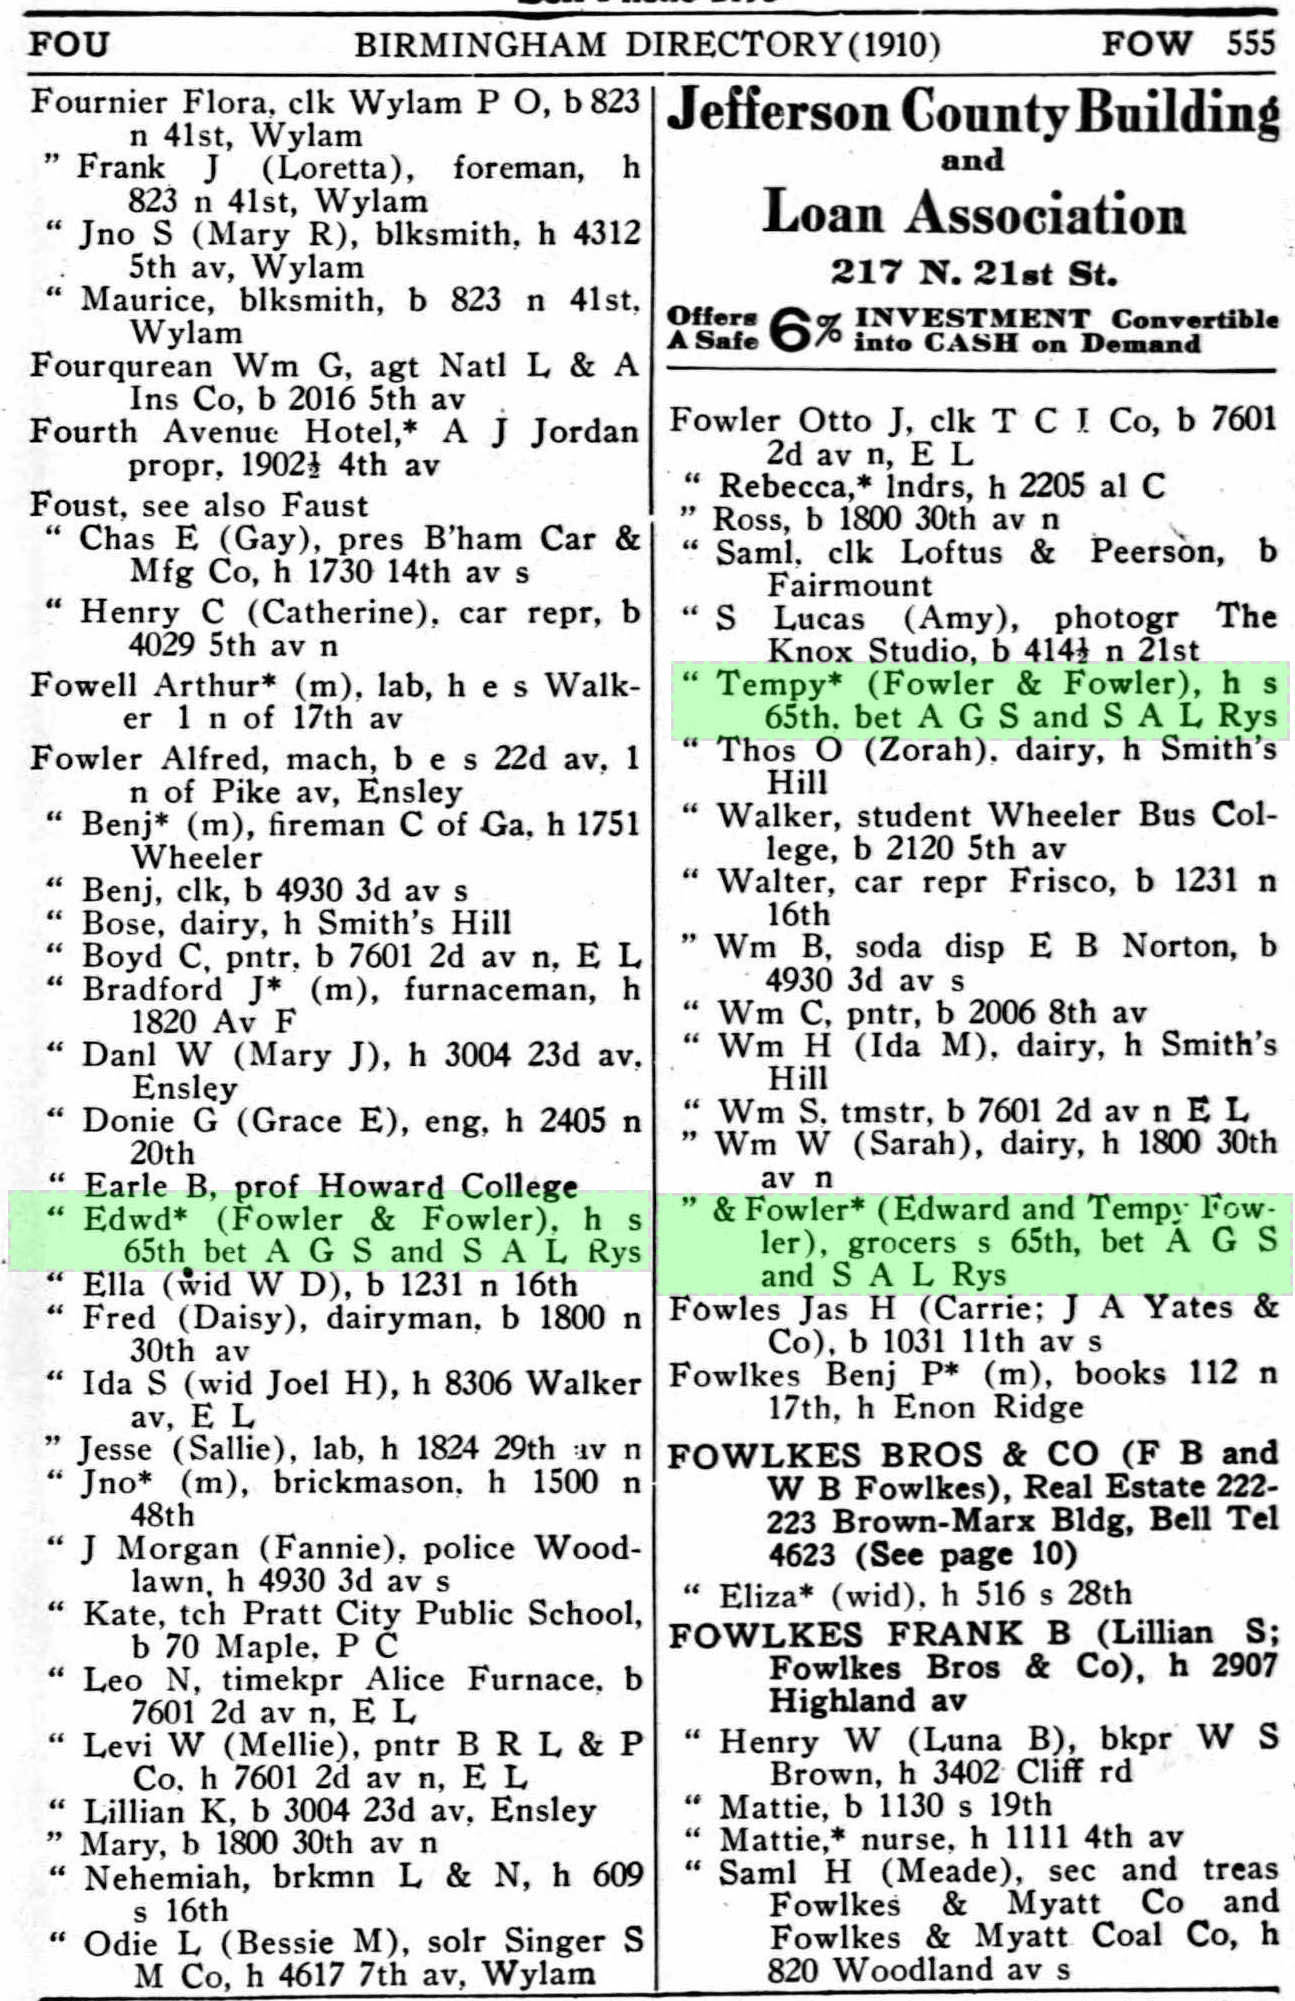 Crop from Birmingham City Directory 1910 marked